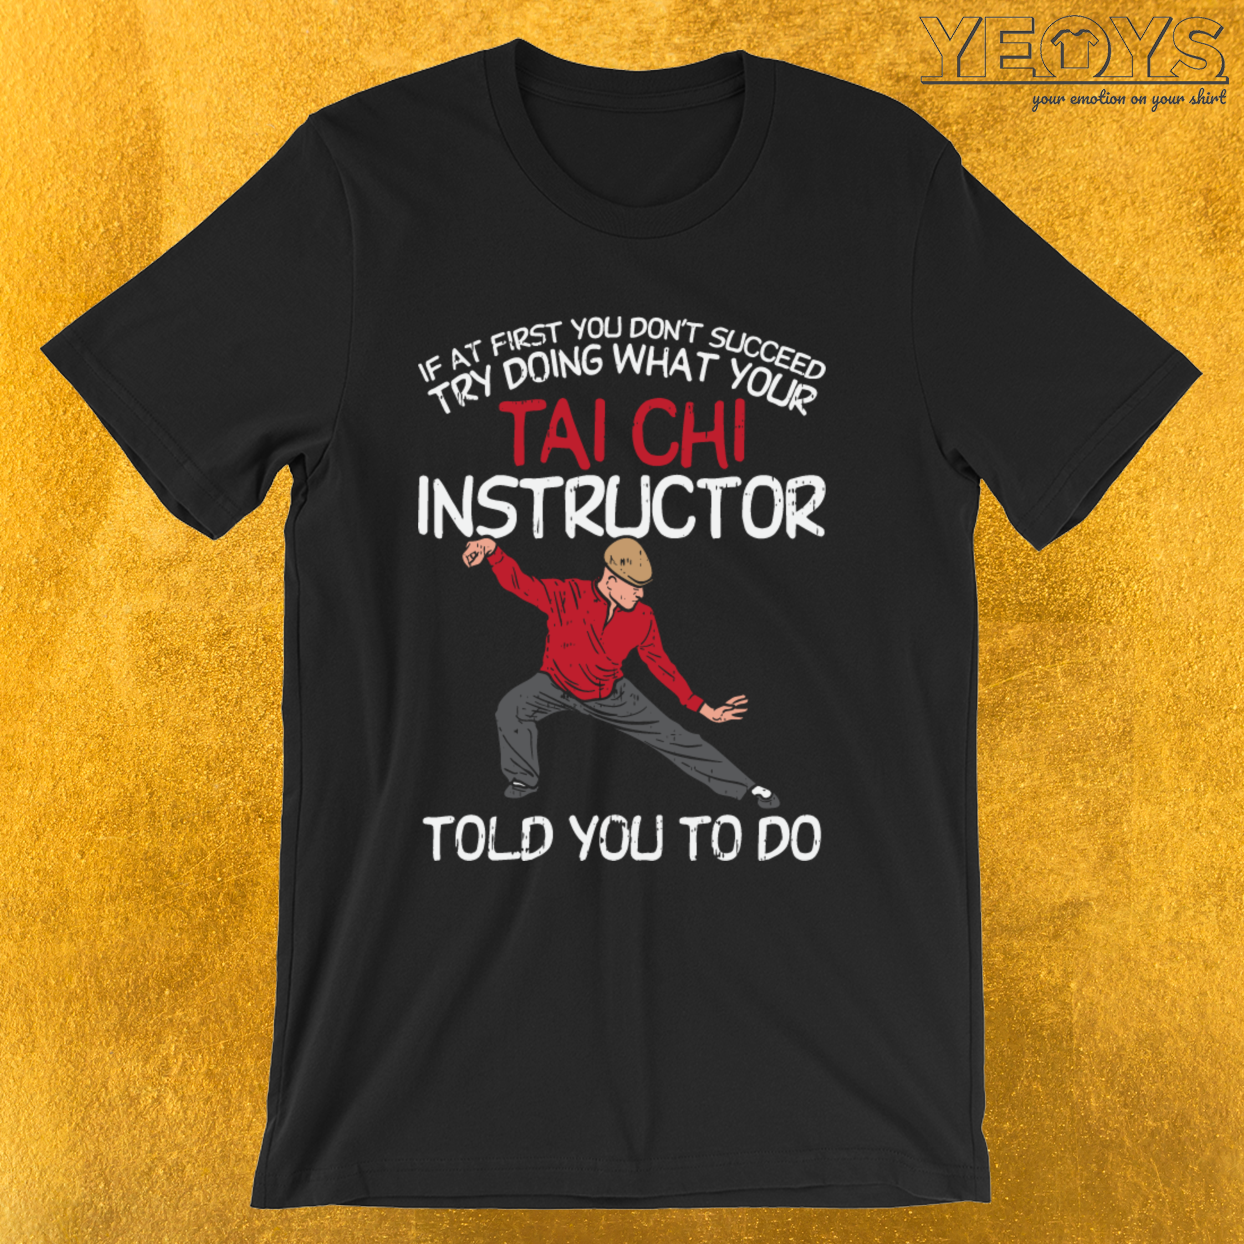 Try What Your Tai Chi Instructor Told You – Martial Arts Tee